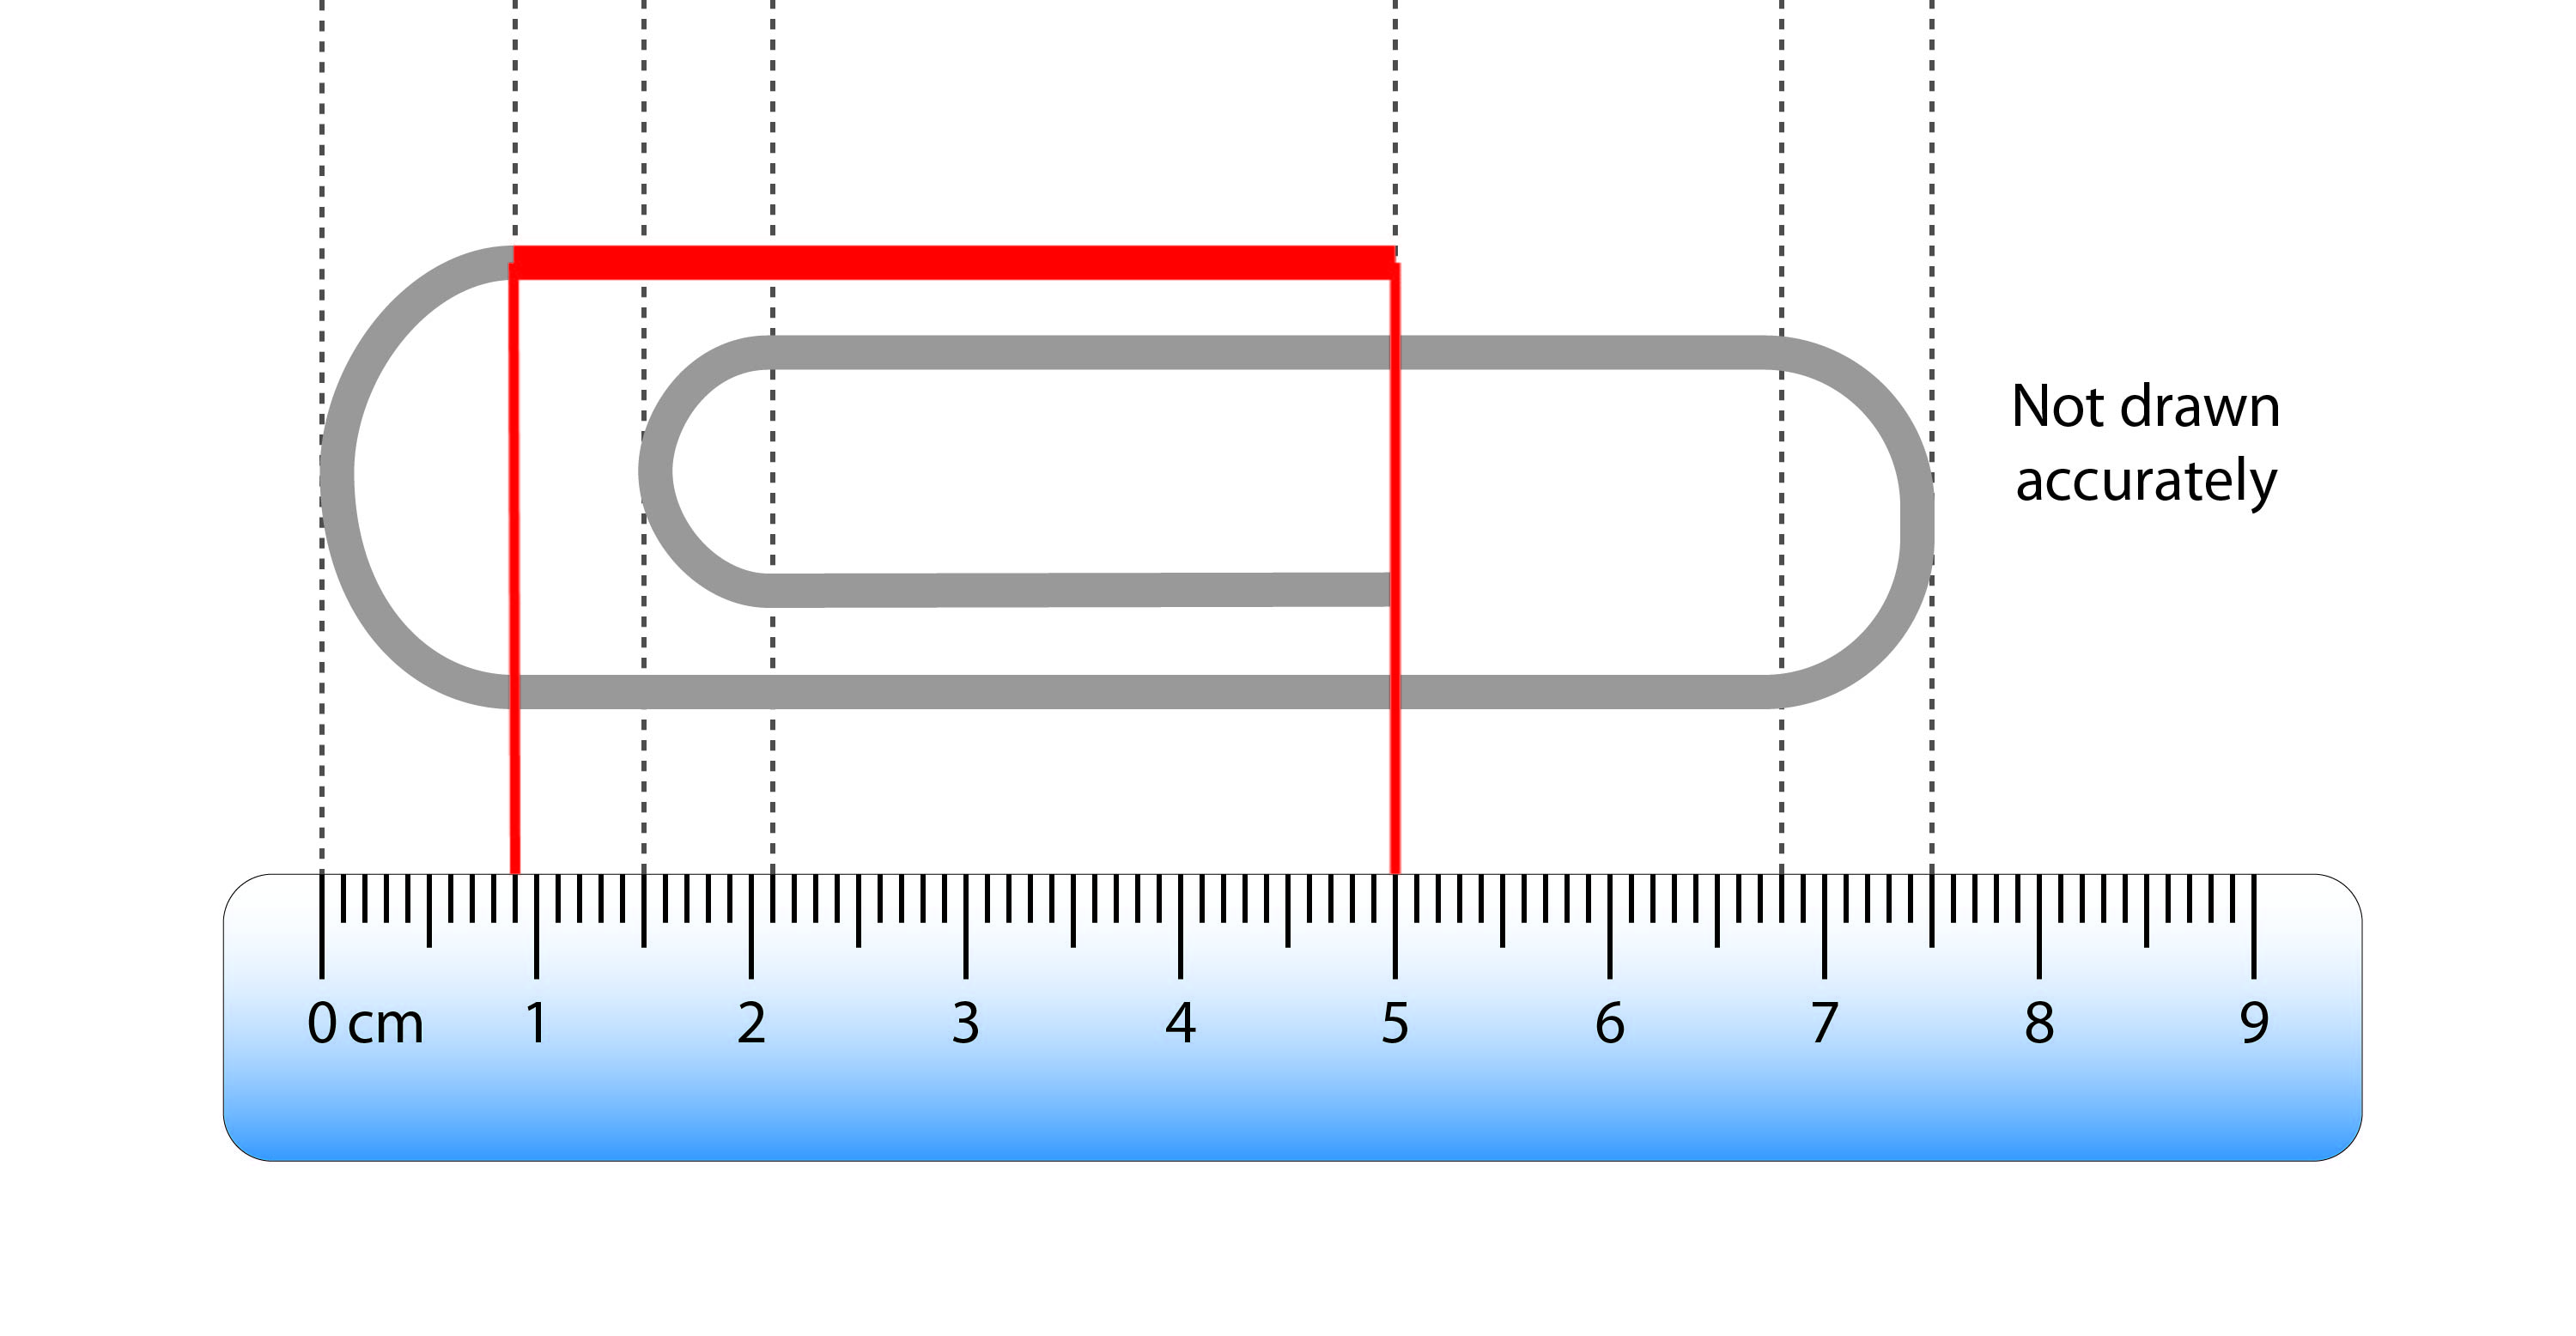 The red line measures 4.1cm